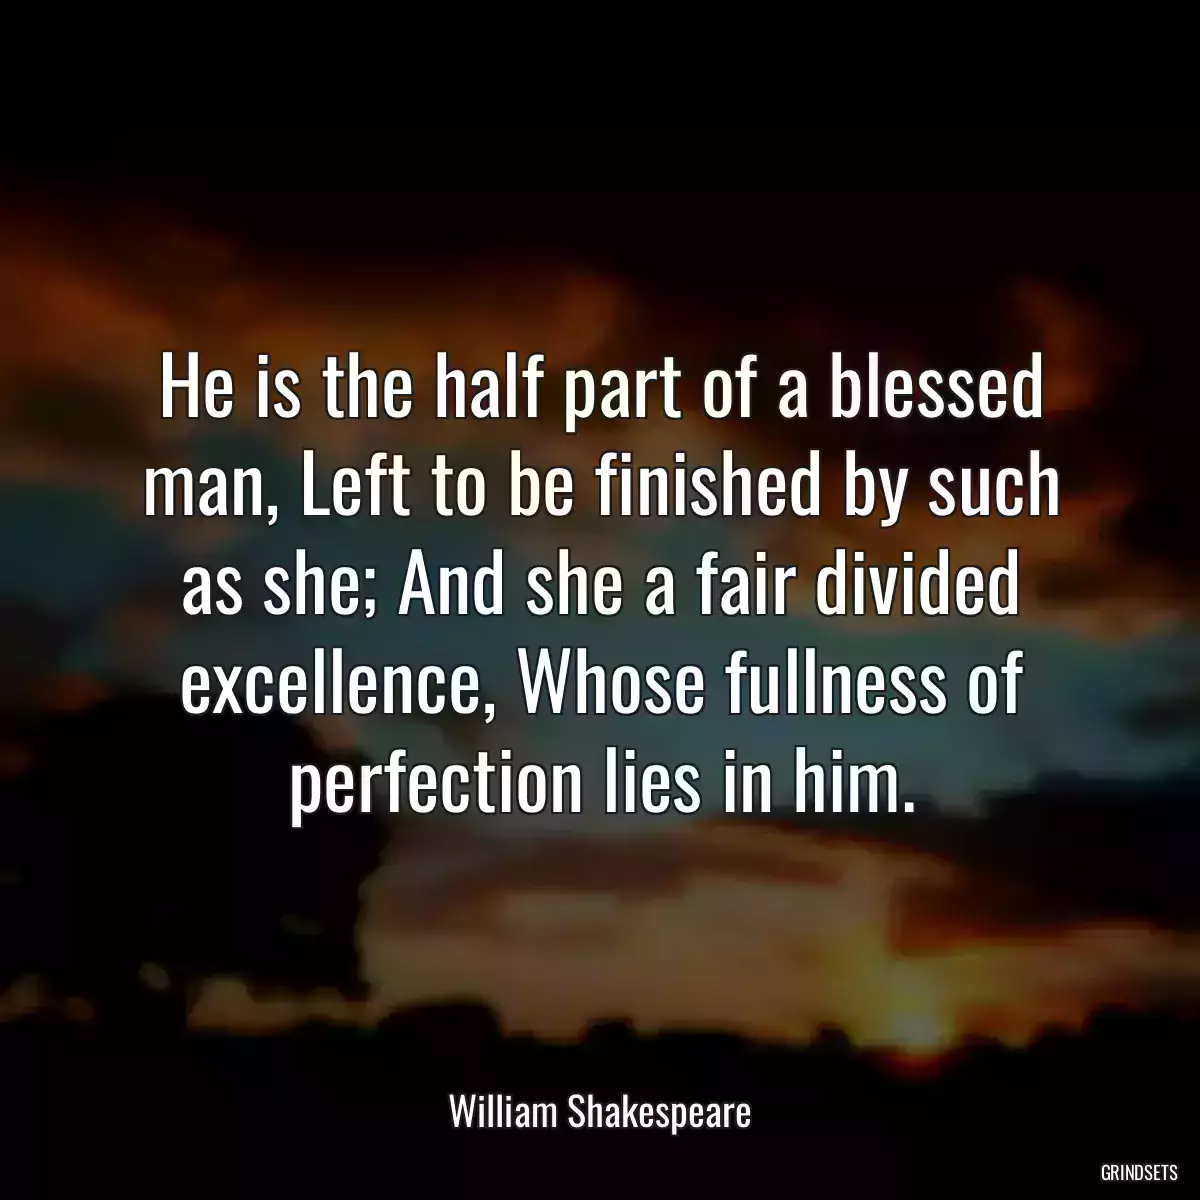 He is the half part of a blessed man, Left to be finished by such as she; And she a fair divided excellence, Whose fullness of perfection lies in him.